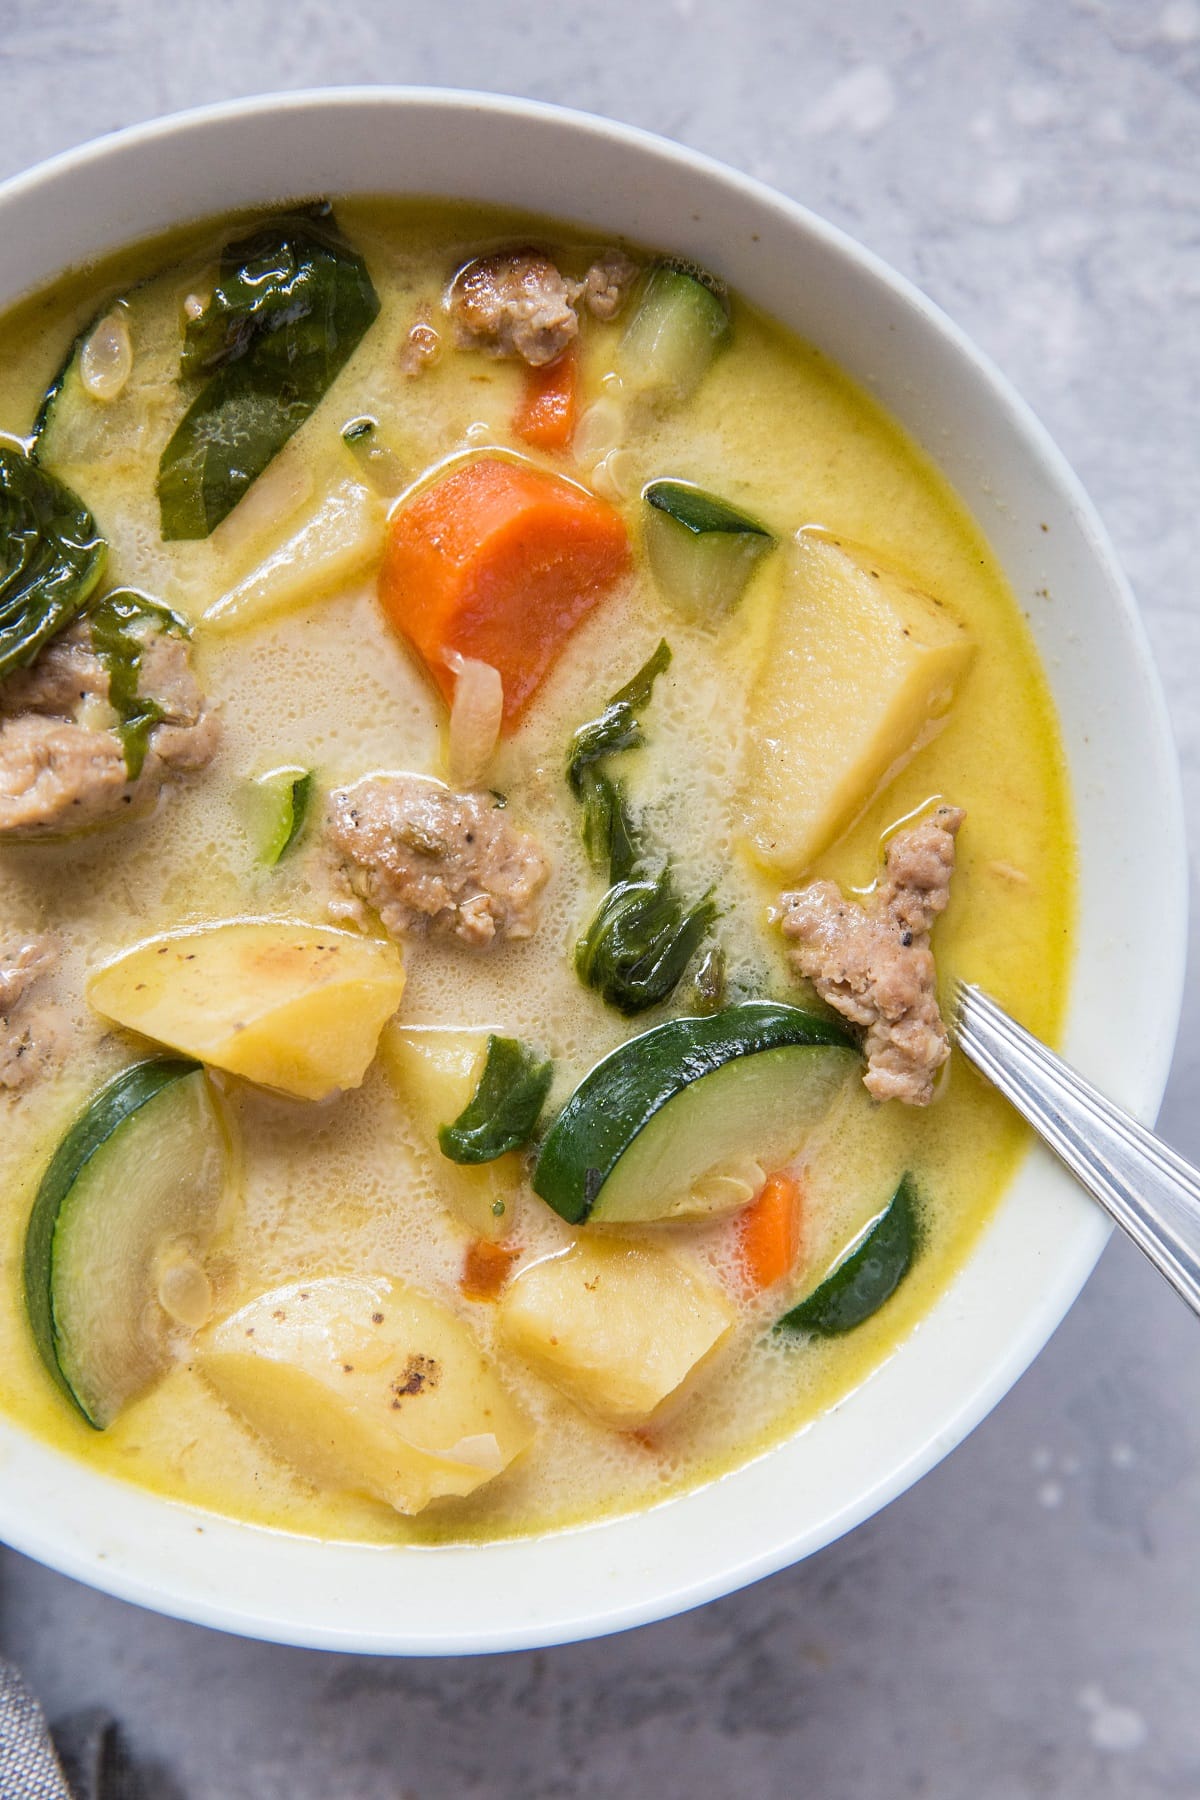 Healthy soup recipe with ground turkey and vegetables - creamy, gluten-free, paleo, whole30